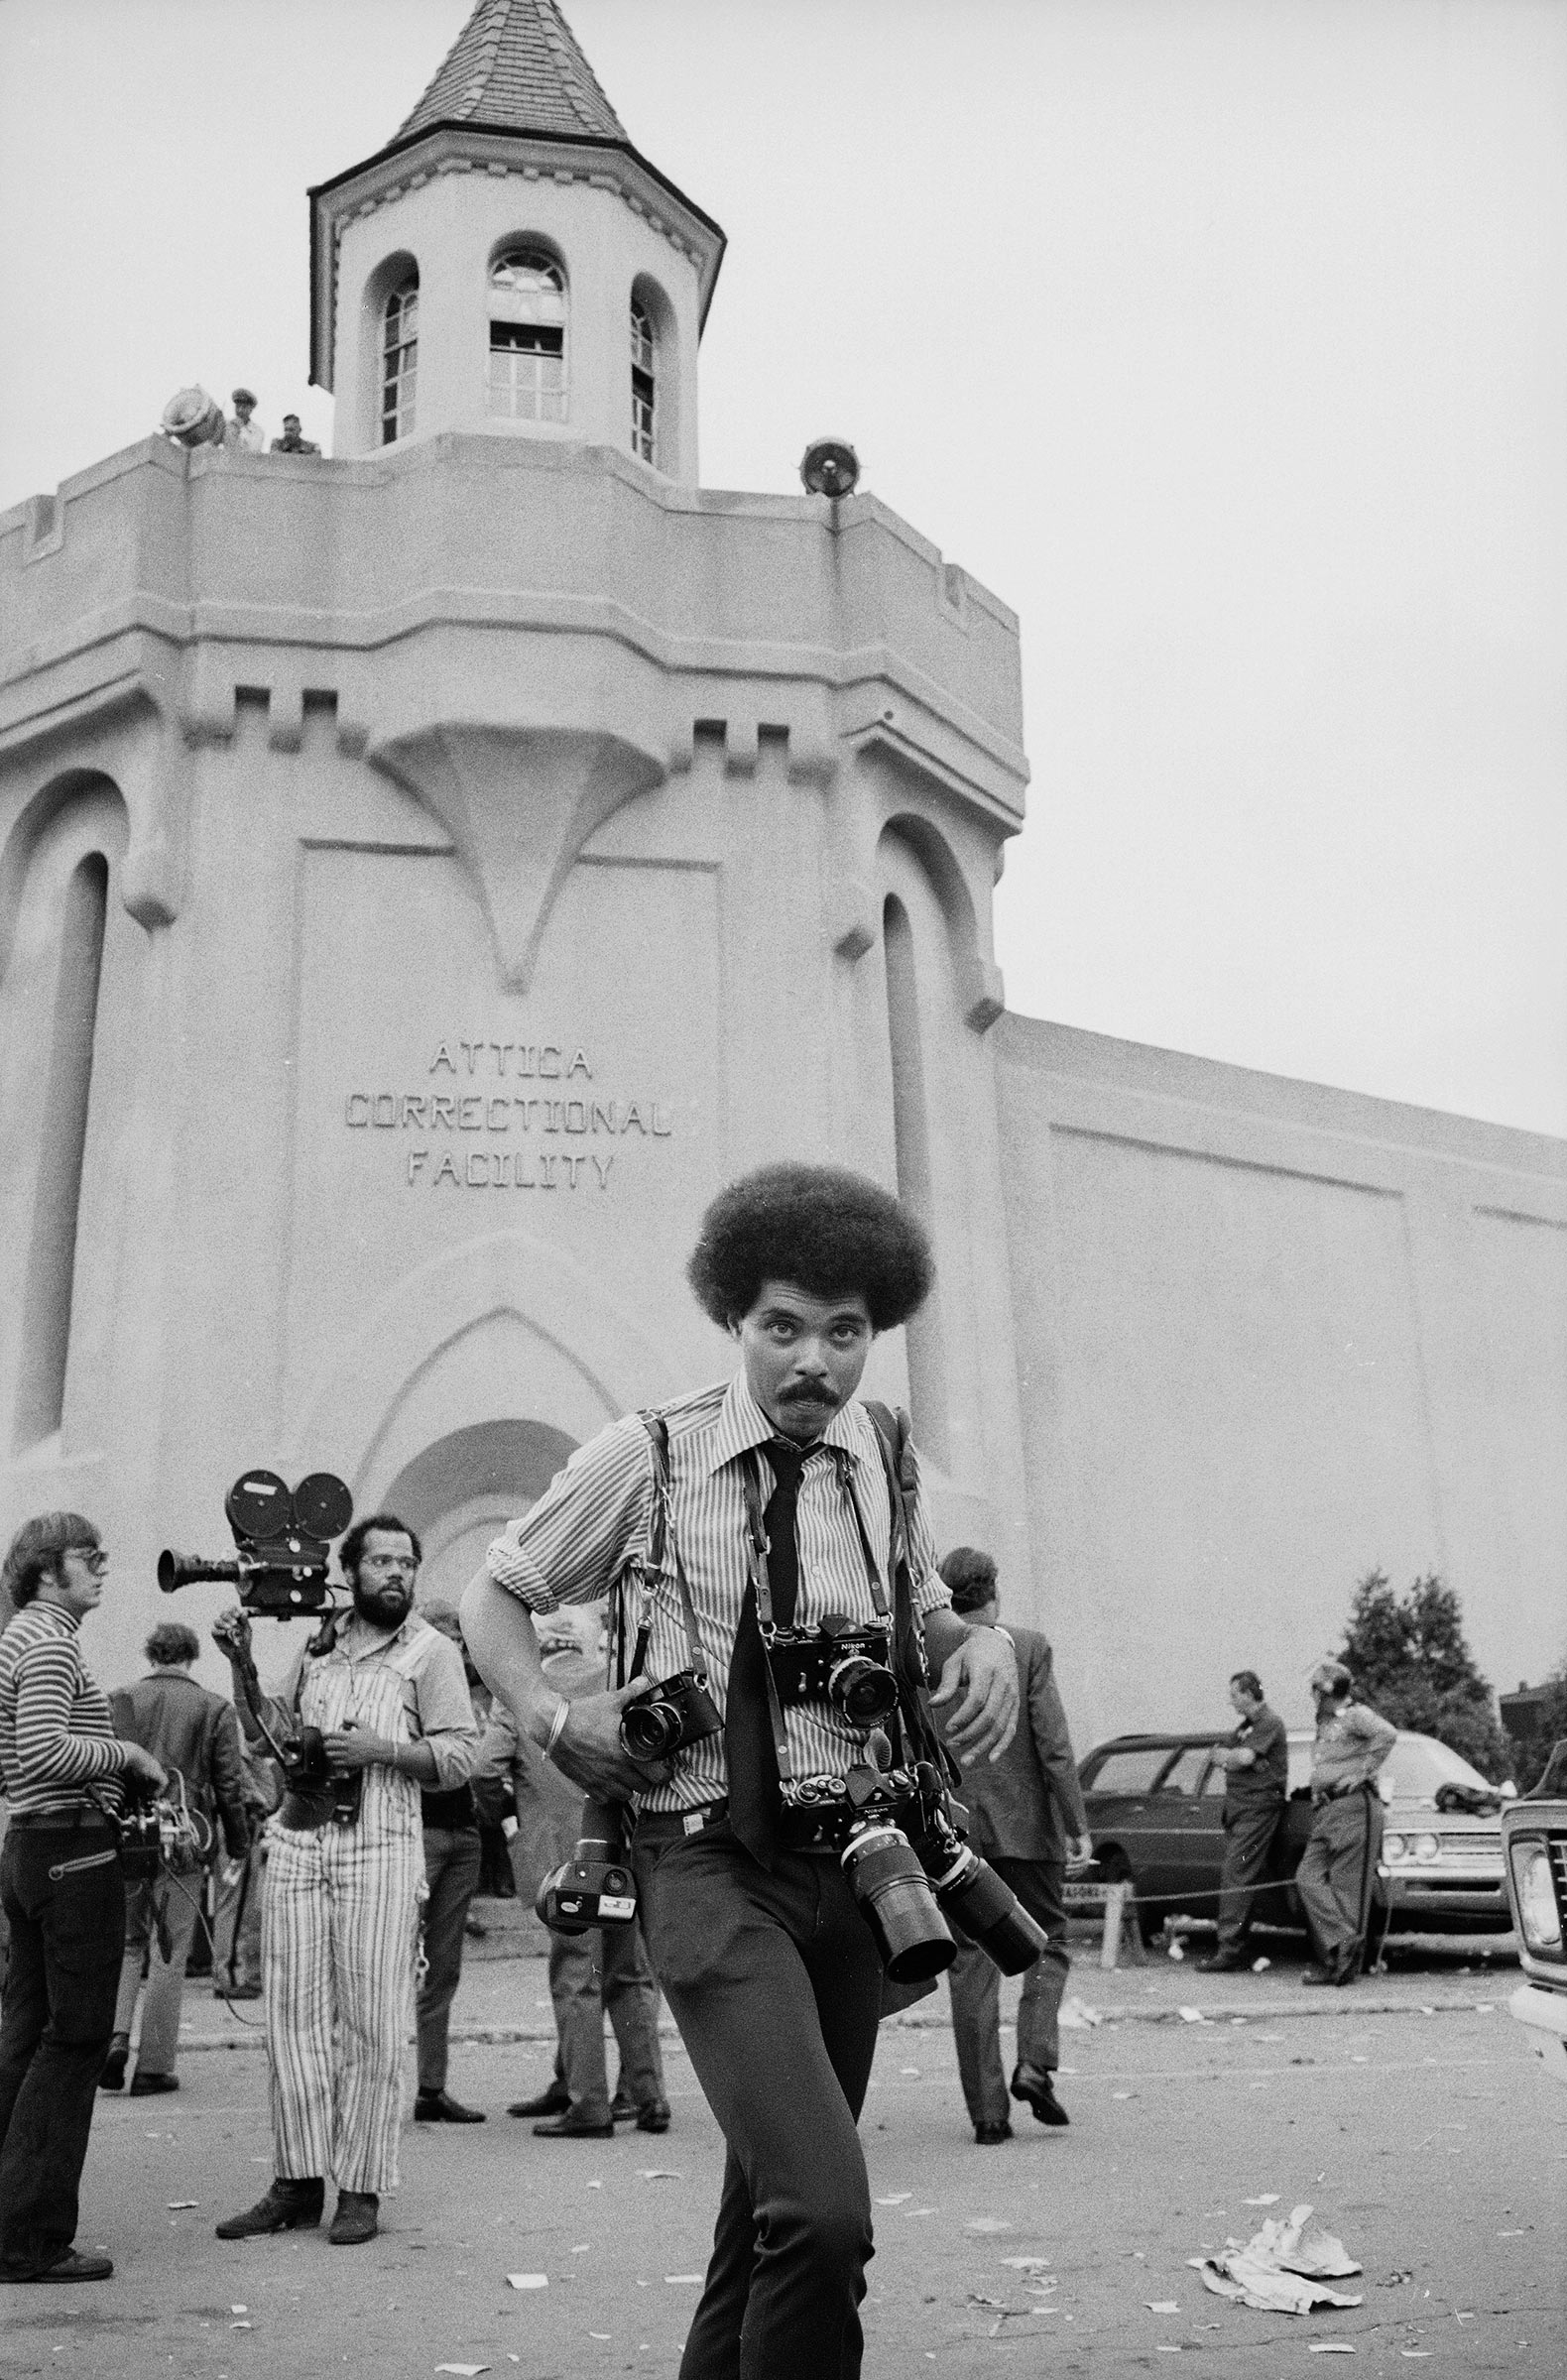 John Shearer on assignment during a prisoner riot and uprising at Attica prison in 1971.